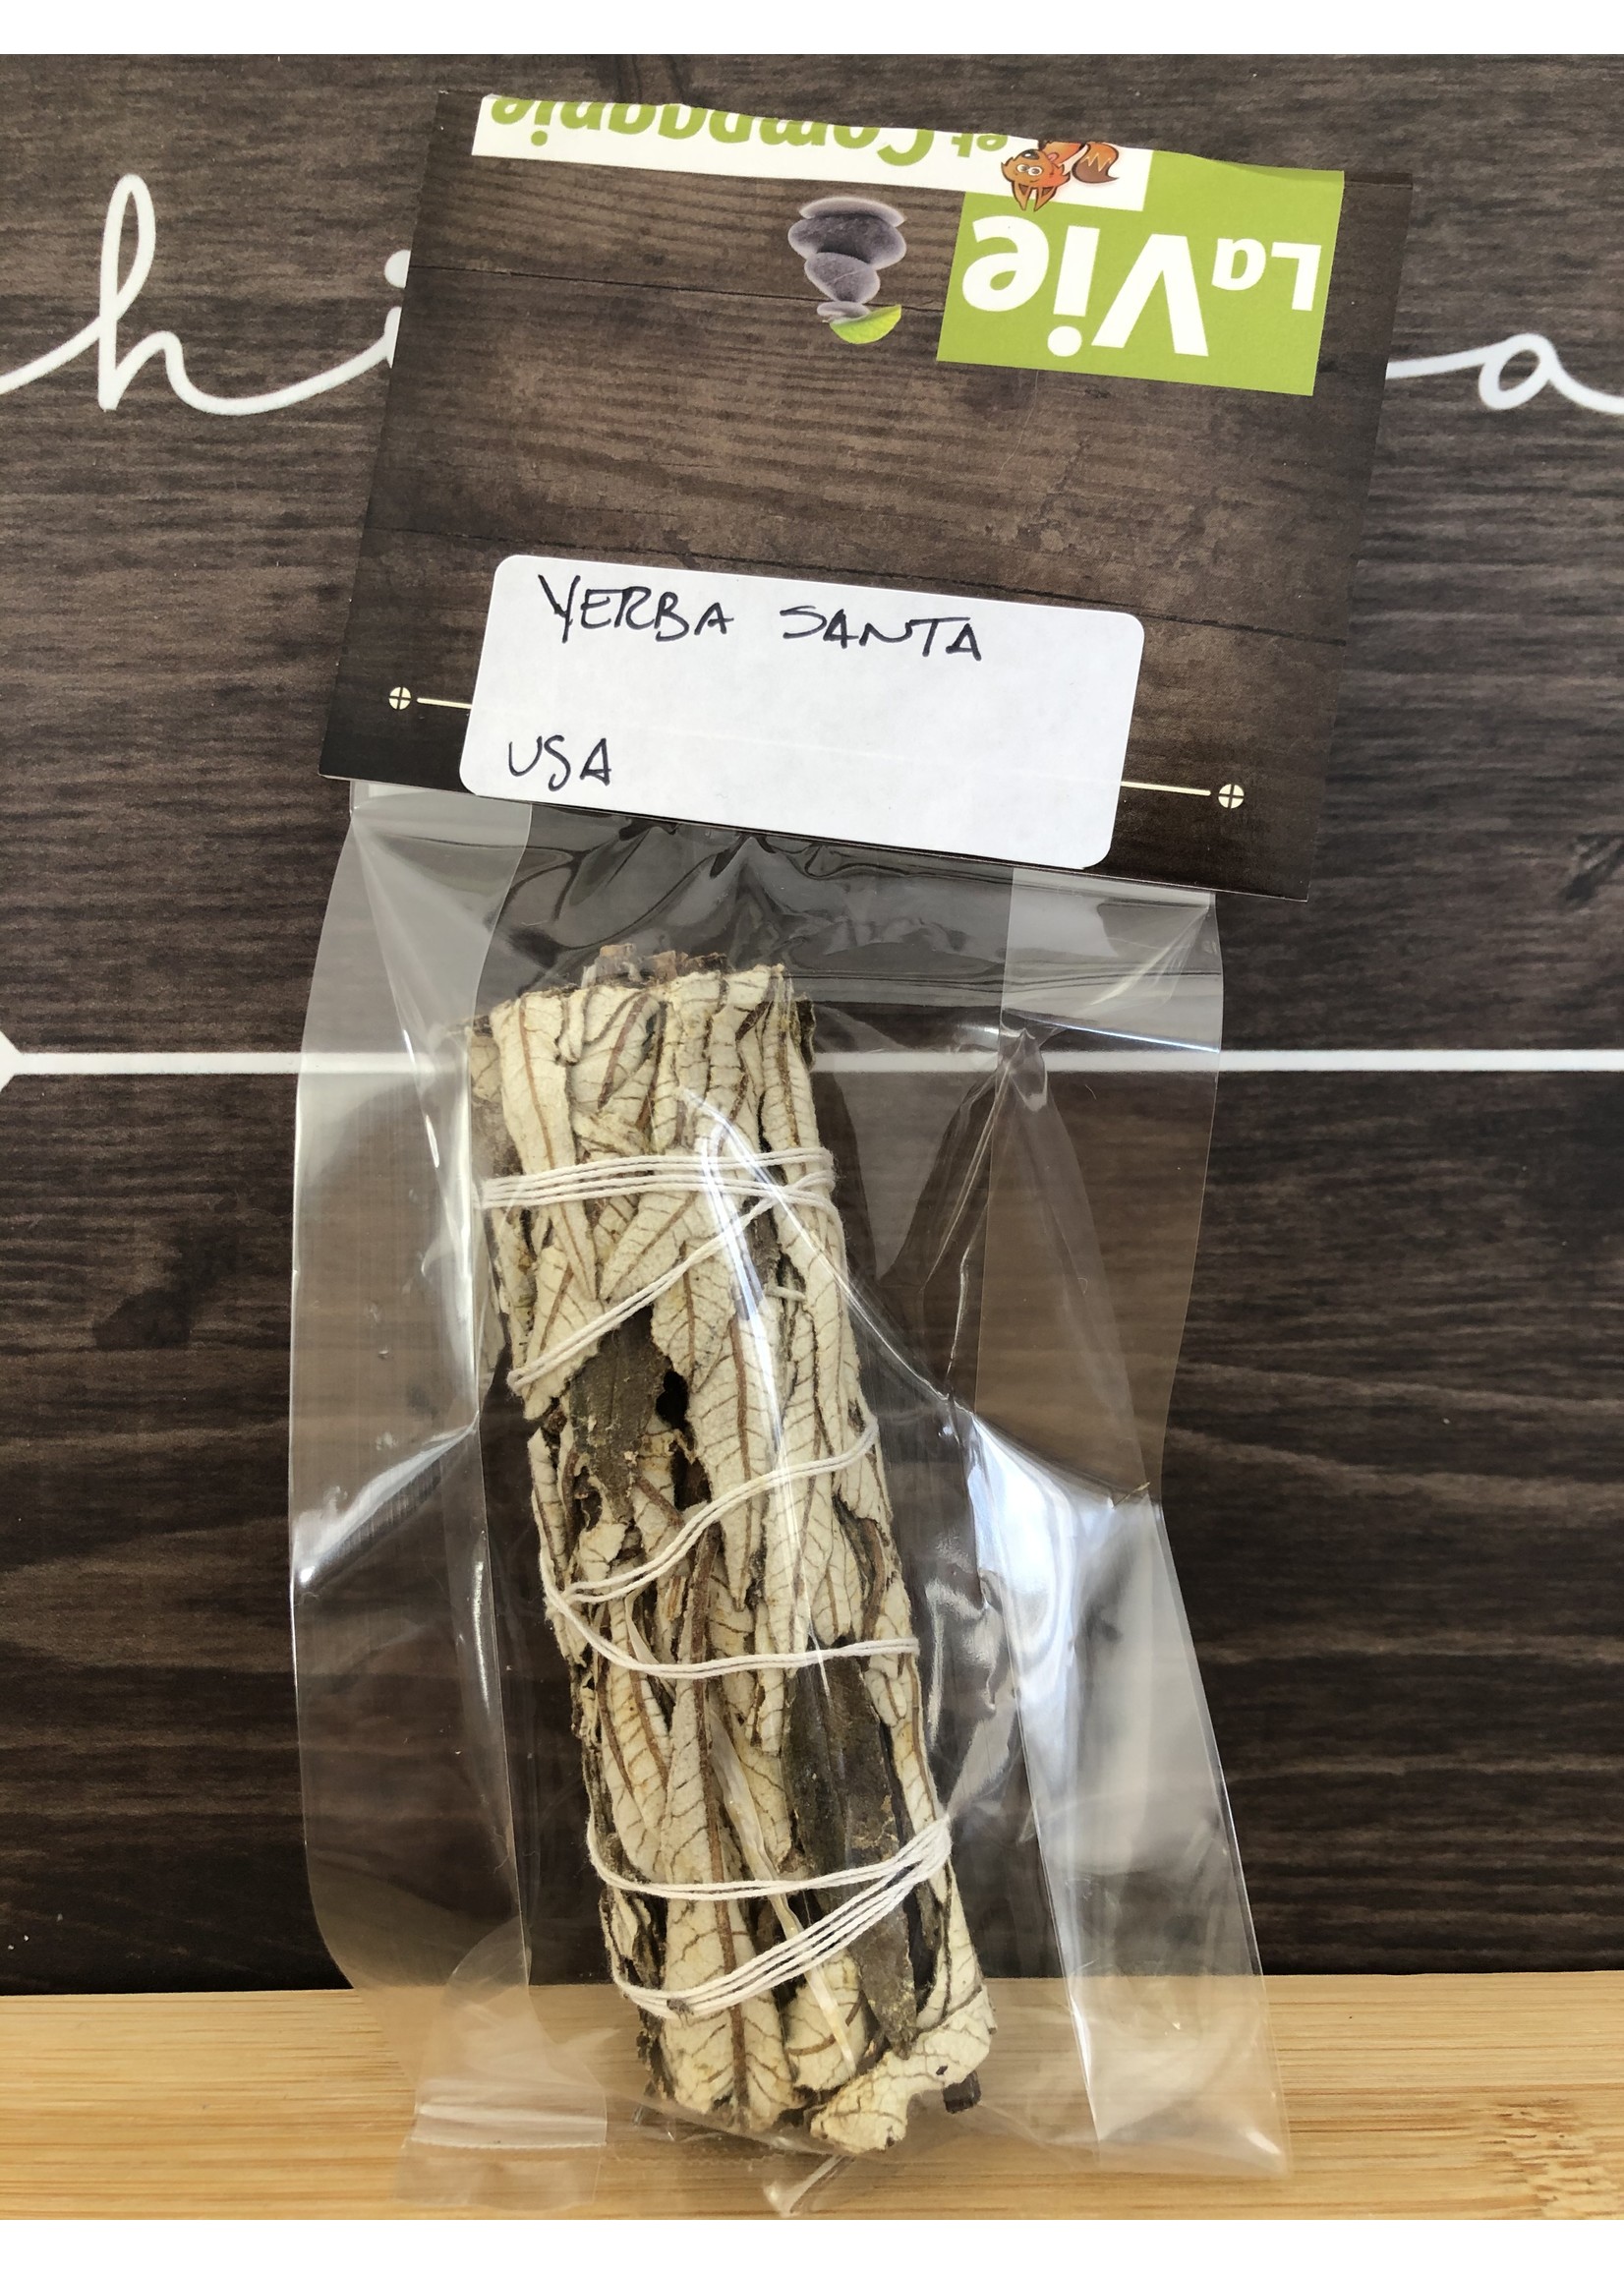 yerba-santa smudge stick, called holy herb, fills the air with delicious fragrance, offers protection against negative energies